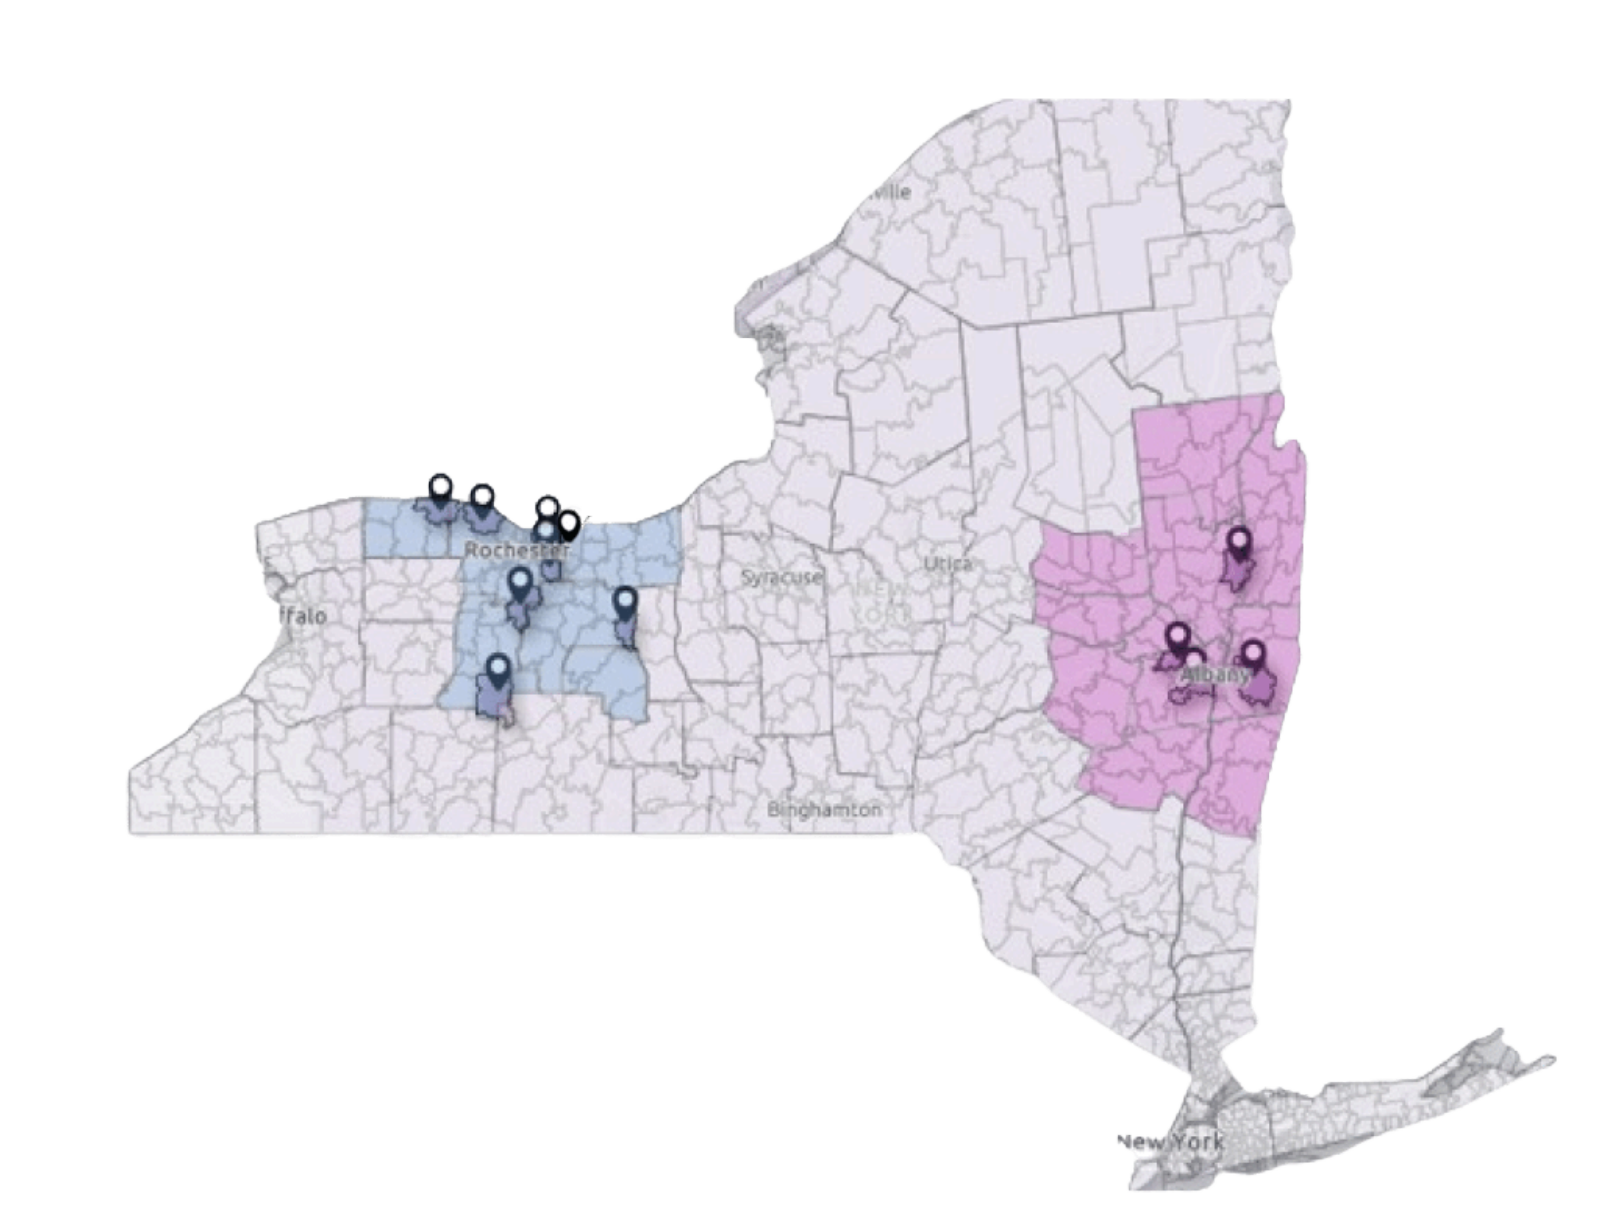 Figure 2 image description: Rochester region highlighted in blue with eight pinpoints and the
Albany region highlighted in pink with four pinpoints. Pinpoints indicate locations of public
school districts that were found to have composting practices.